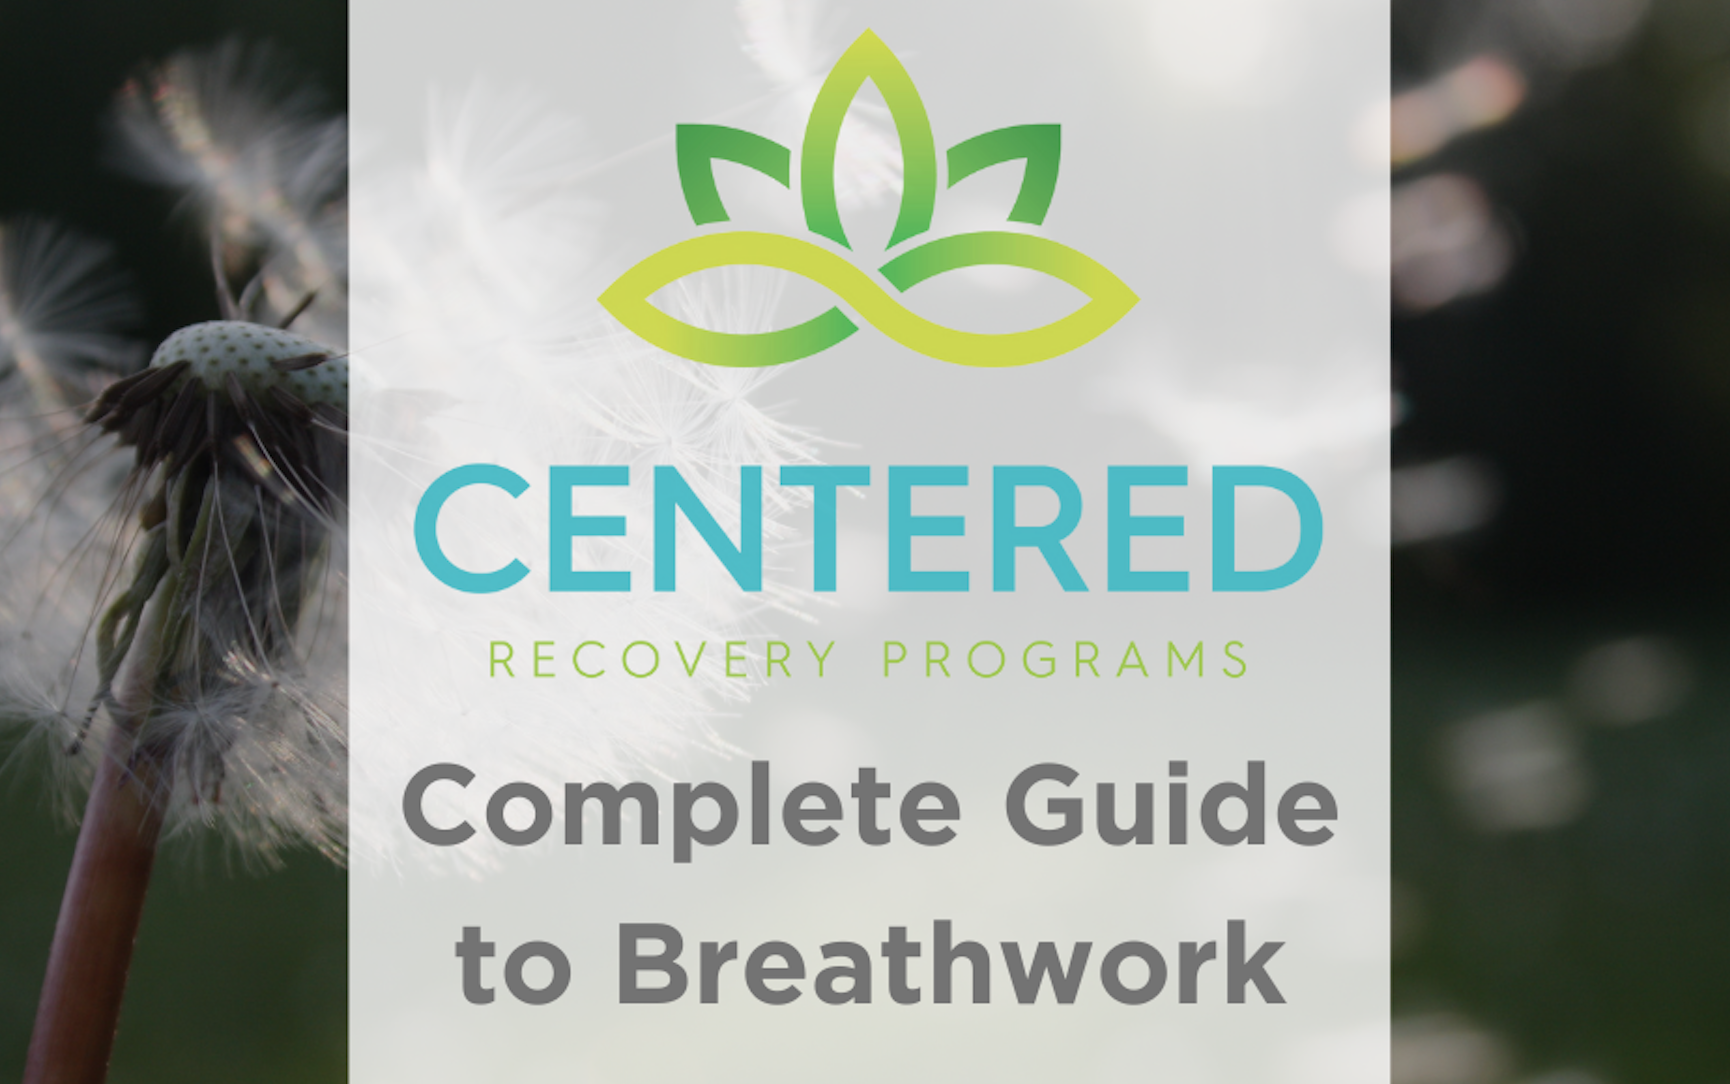 The Complete Guide to Breathwork